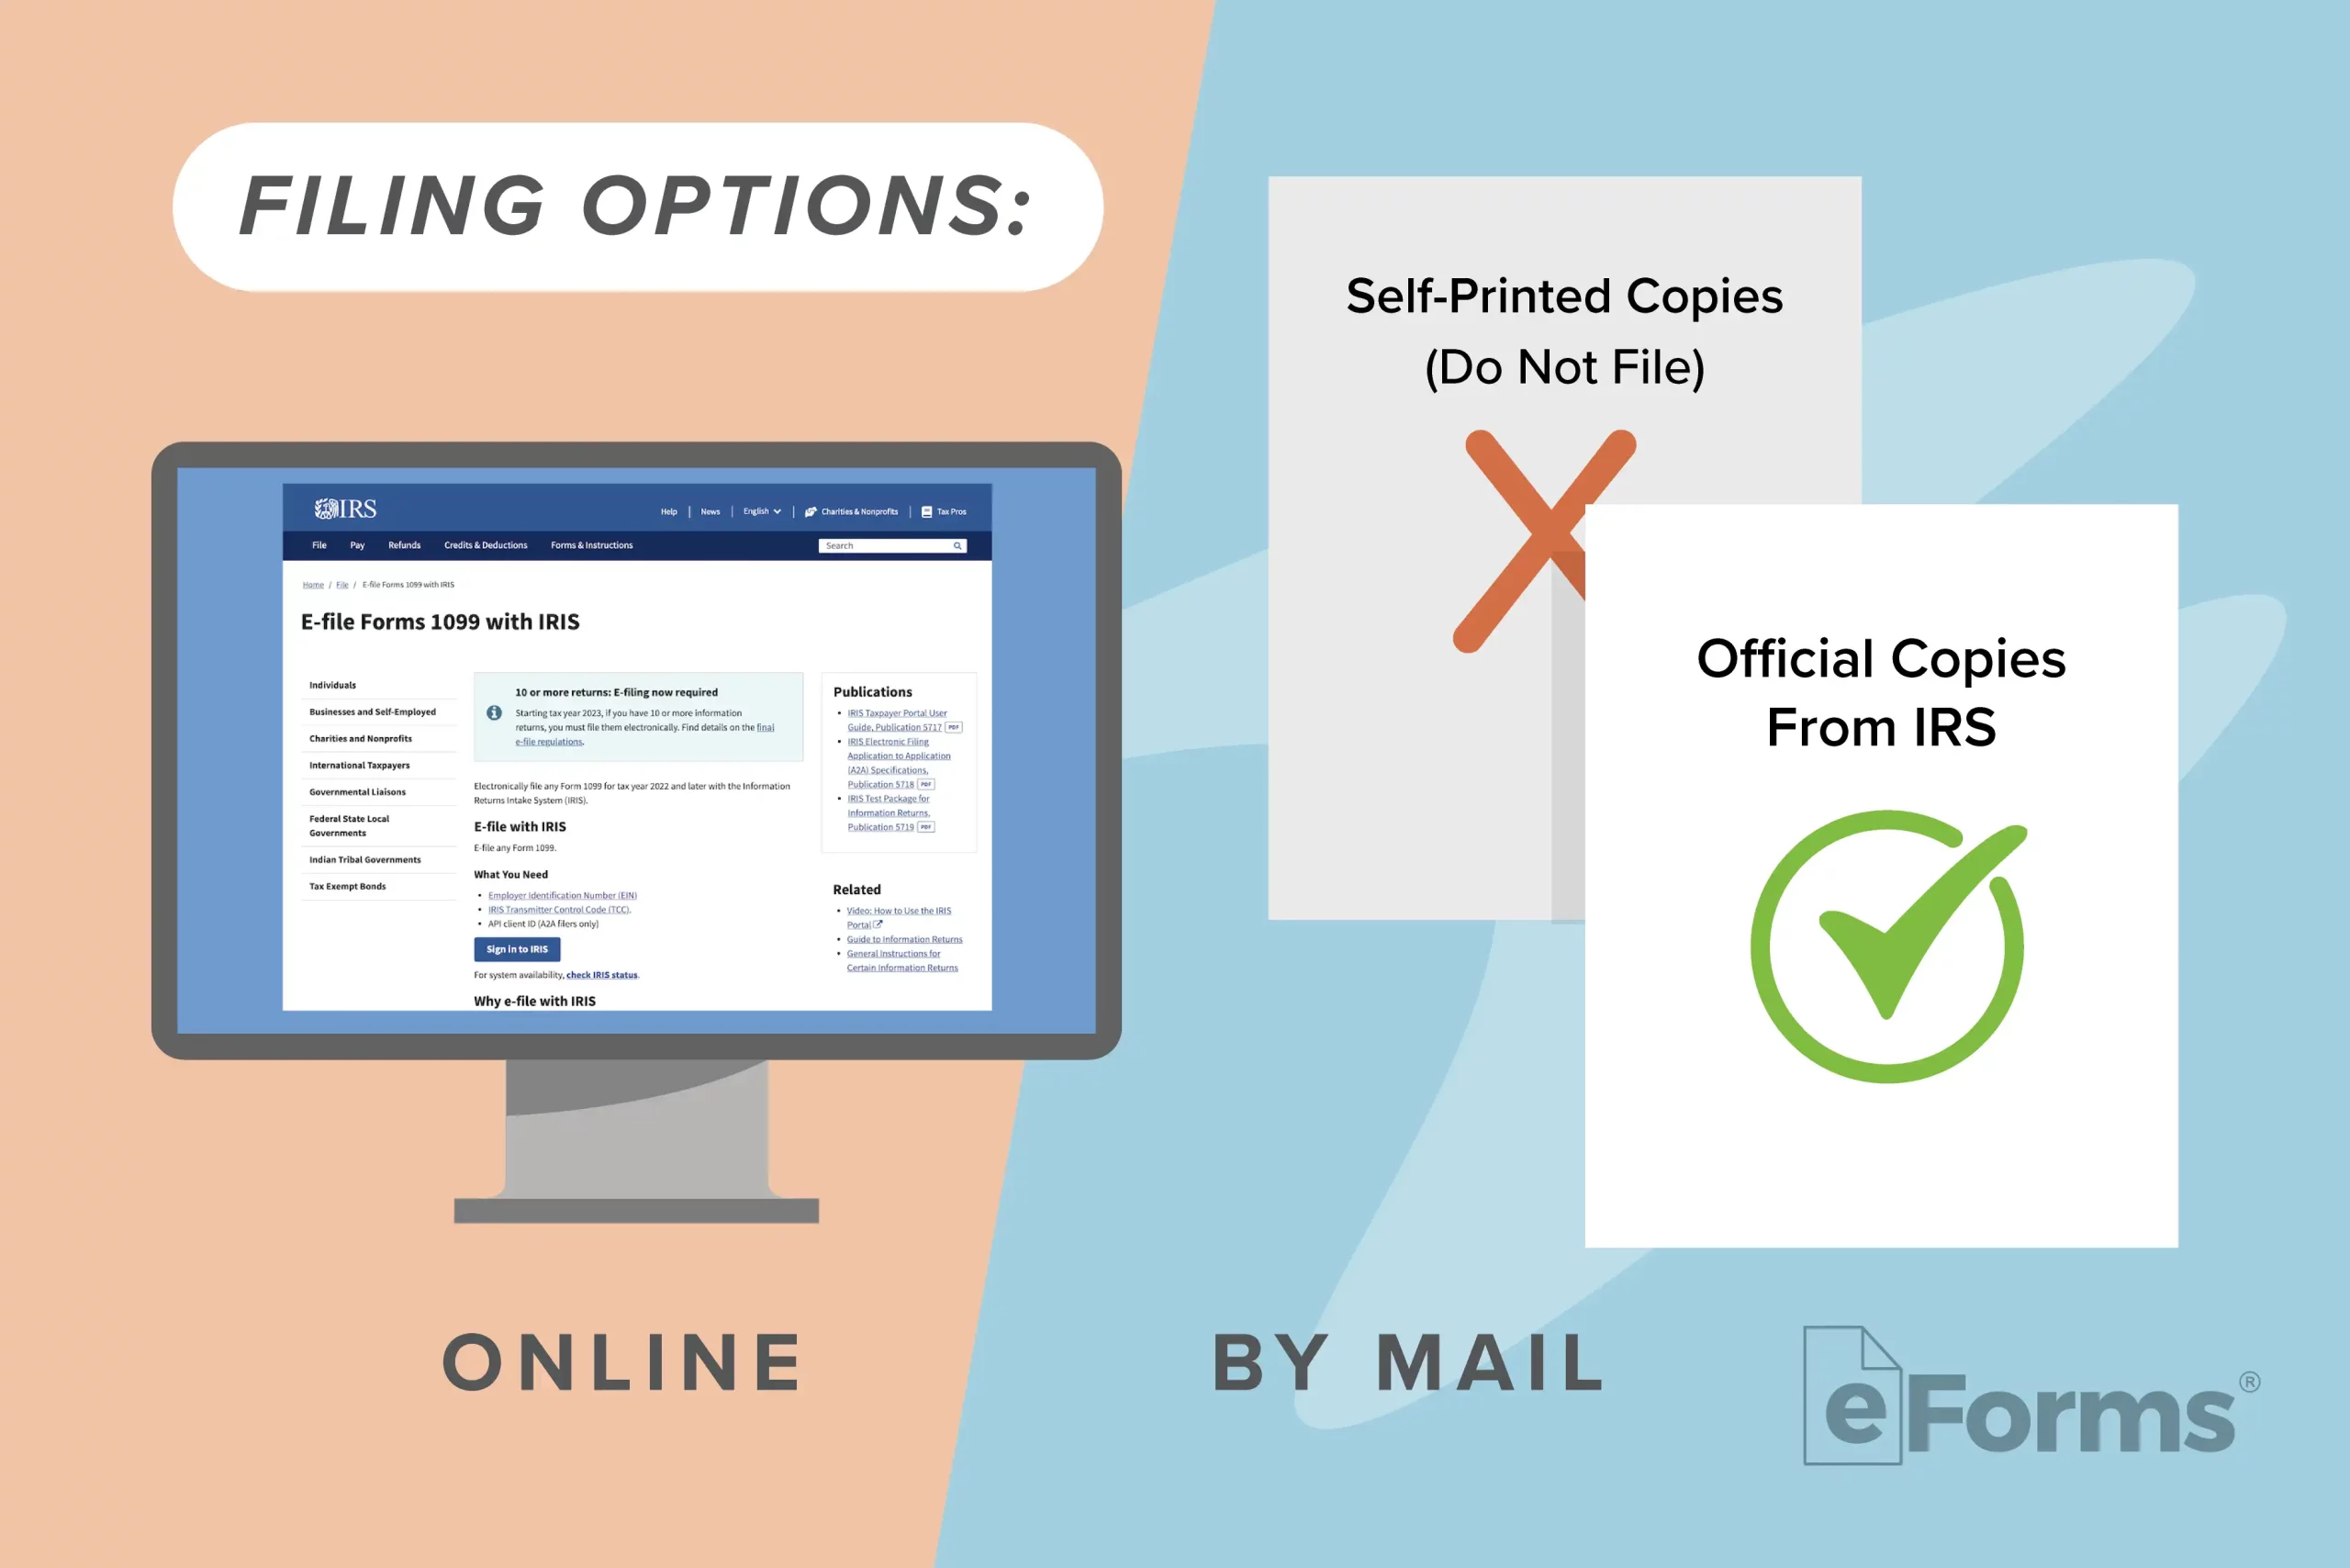 Infographic showing filing options: Online and by mail.